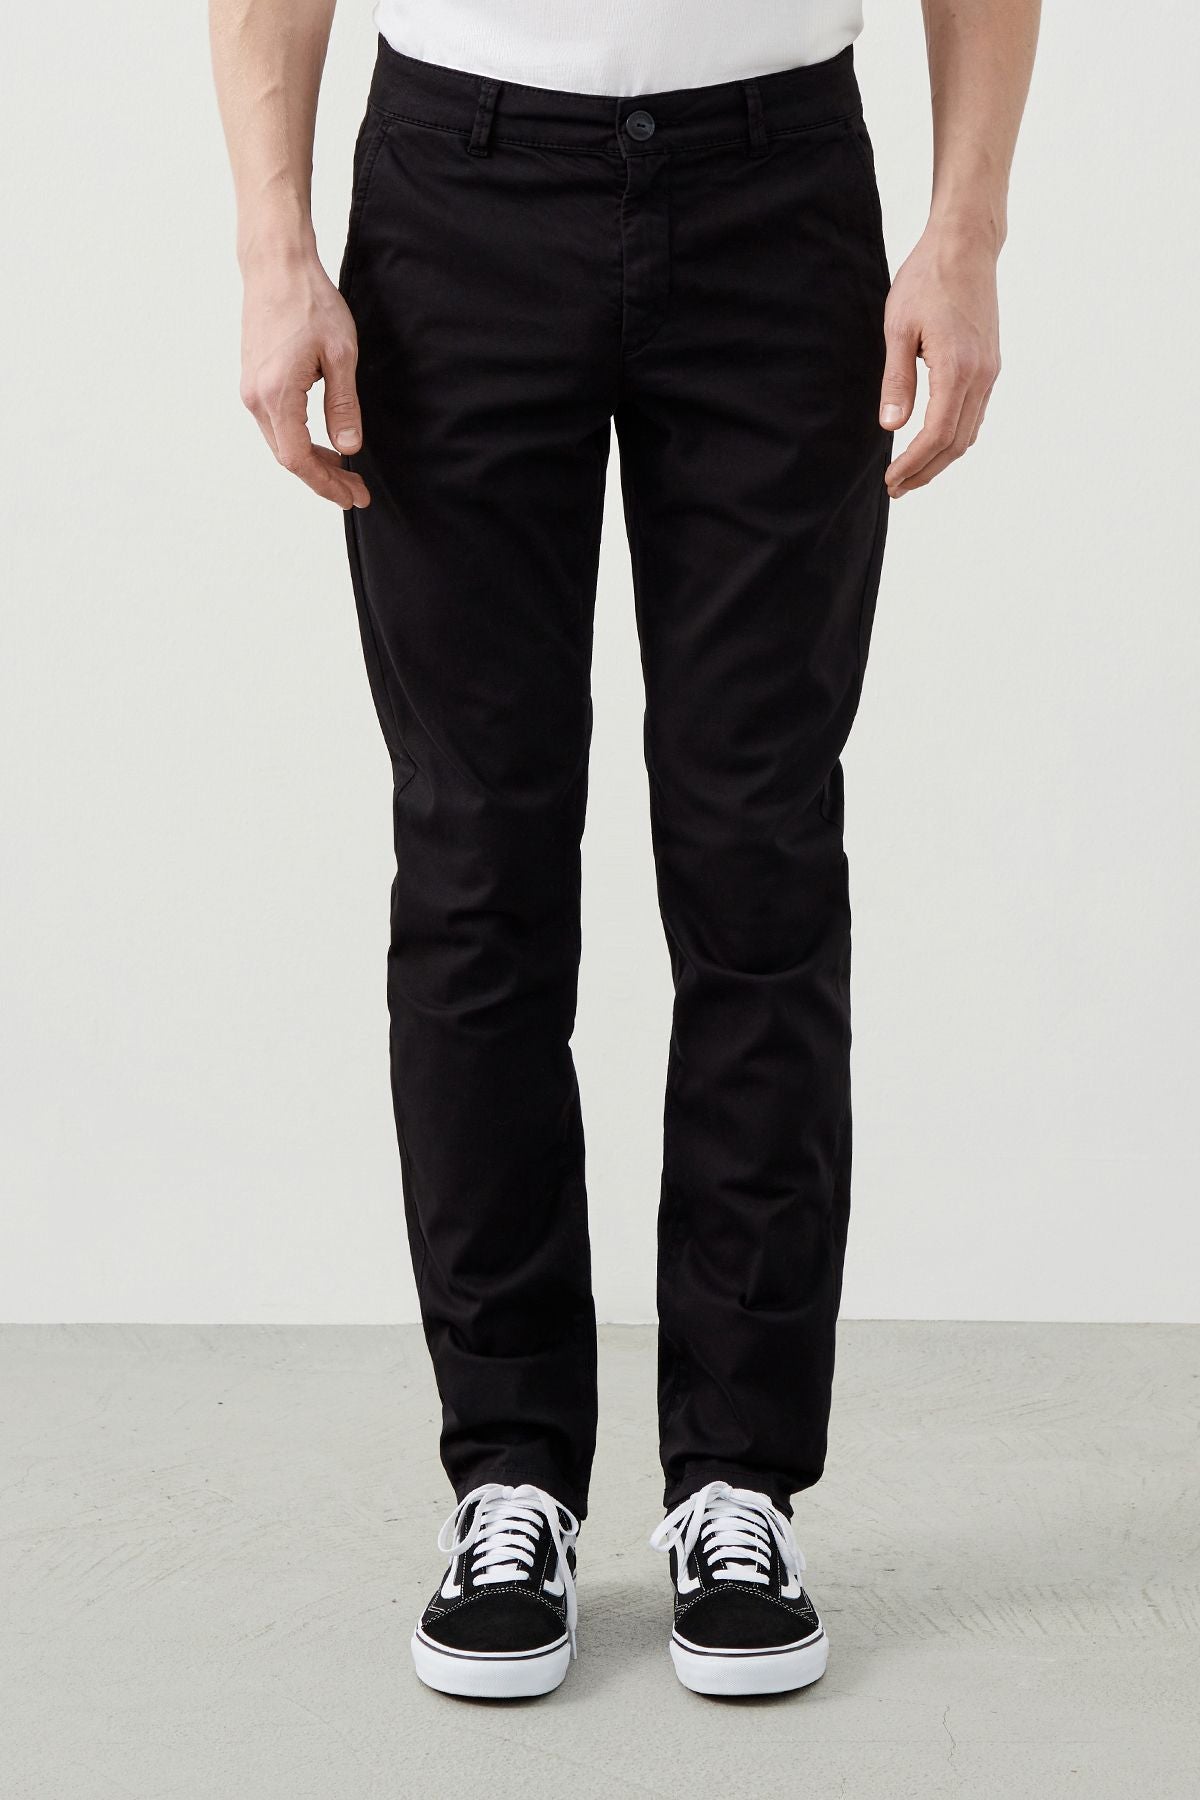 Stylish black chinos combined with black sneakers, perfect for casual or formal wear.